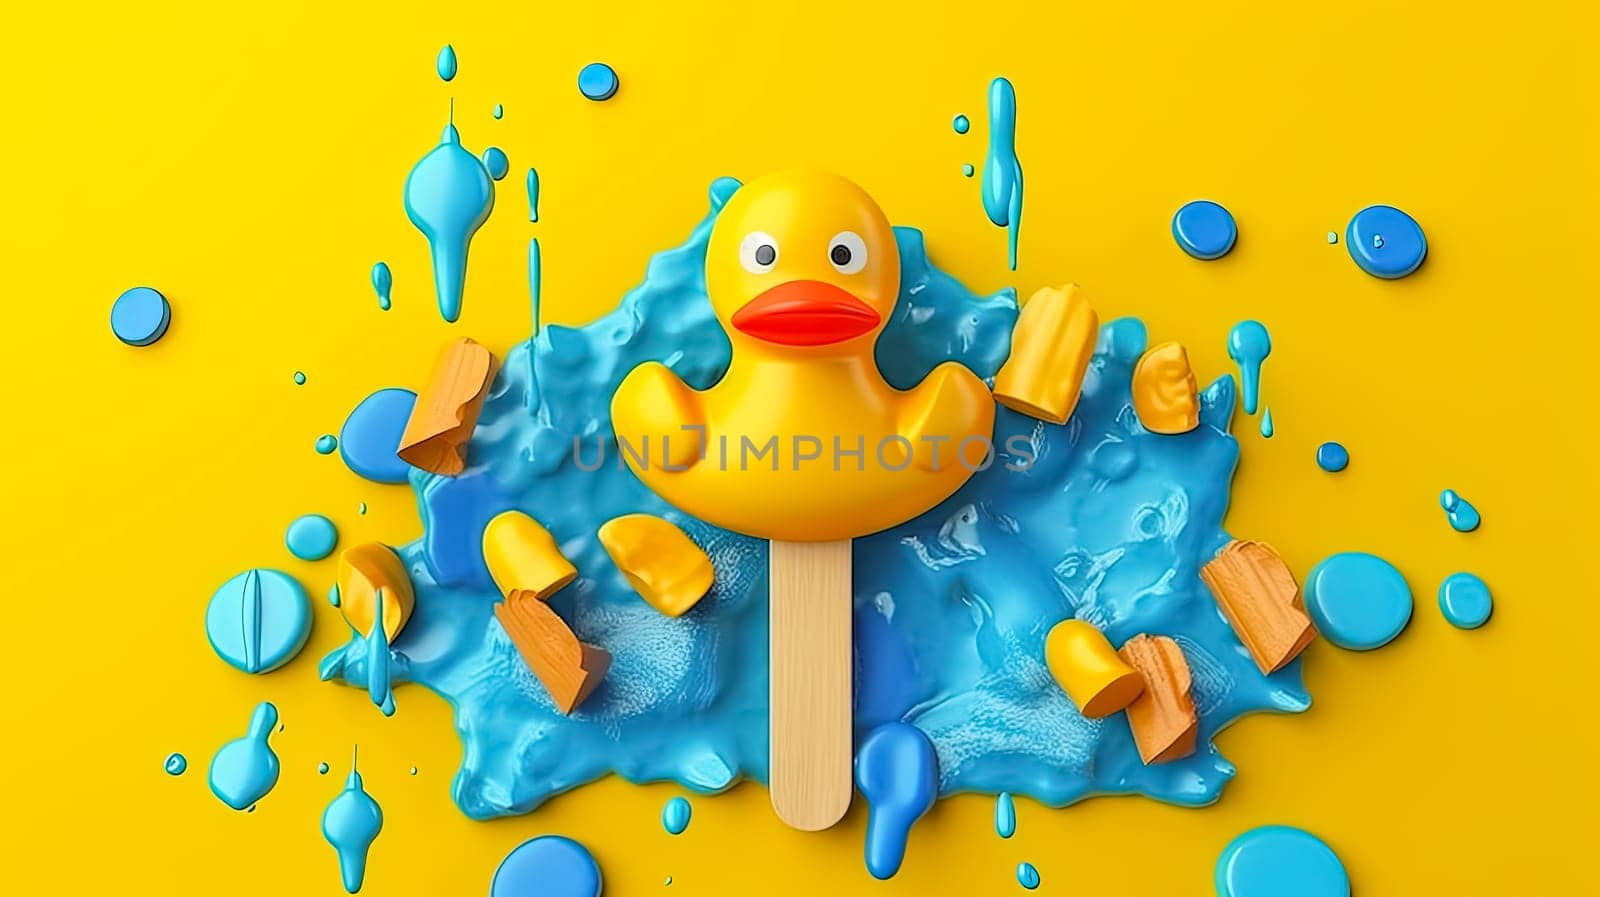 Chill vibes A delectable scoop of ice cream adorned with a cute yellow duck, set against a refreshing blue backdrop. Summers sweet escape.